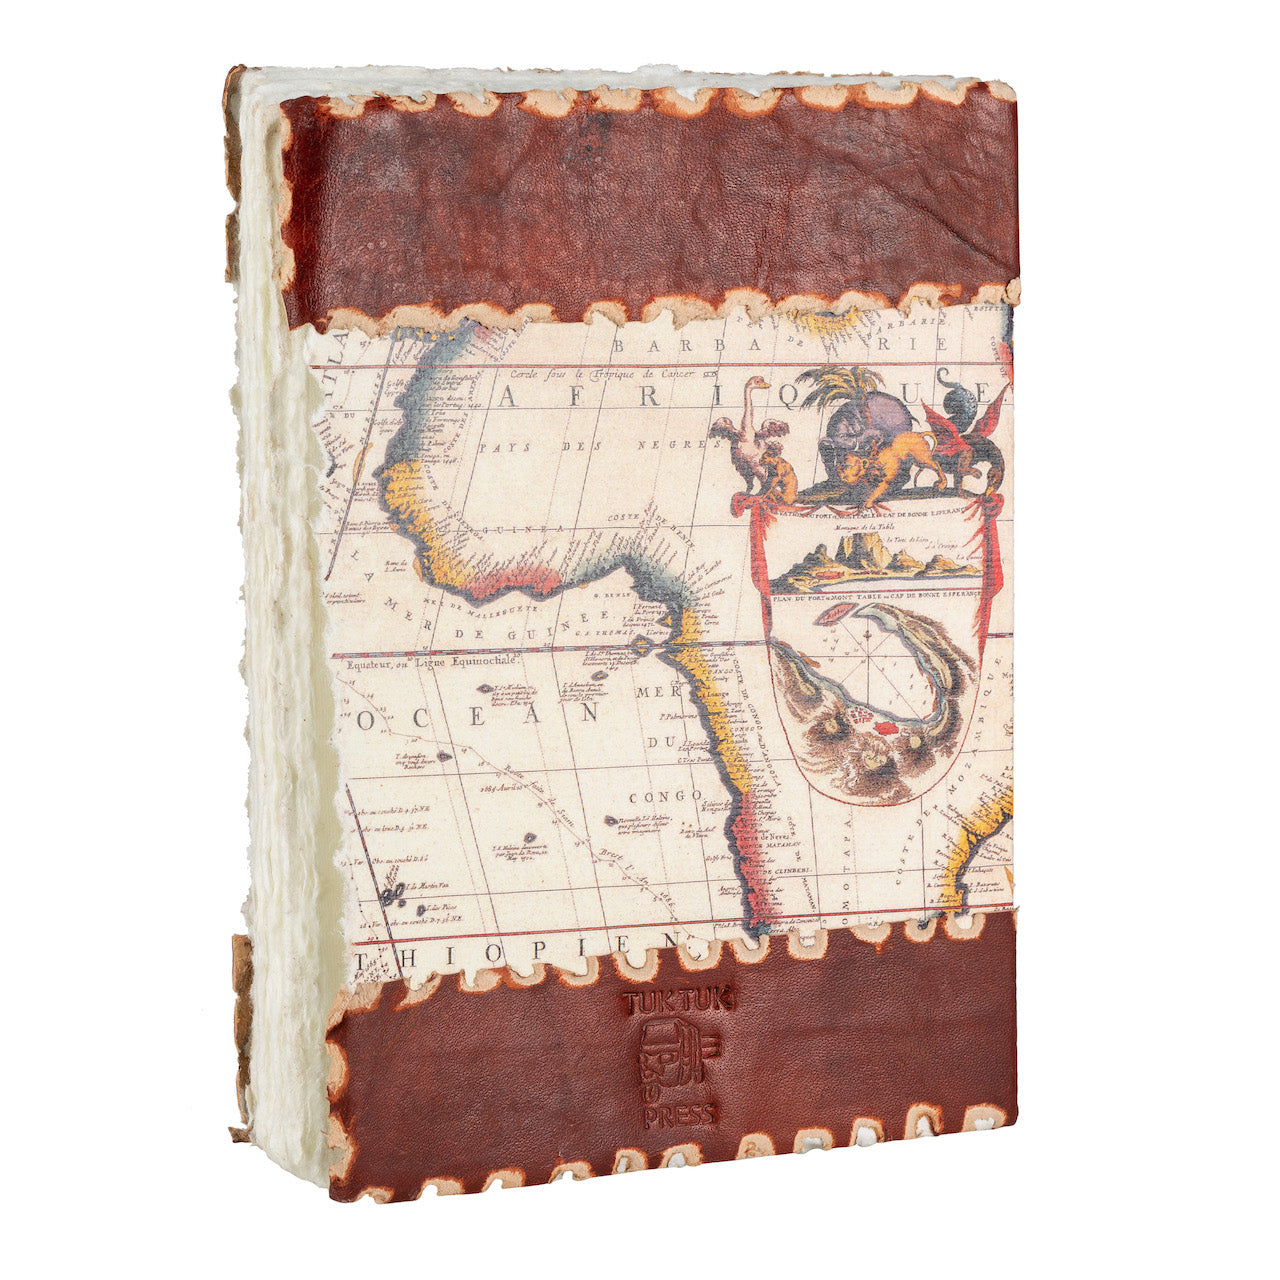 Tuk Tuk Press® Handmade Leather Journal with 144 Hand Pulled Cotton Pages, Vintage World Map